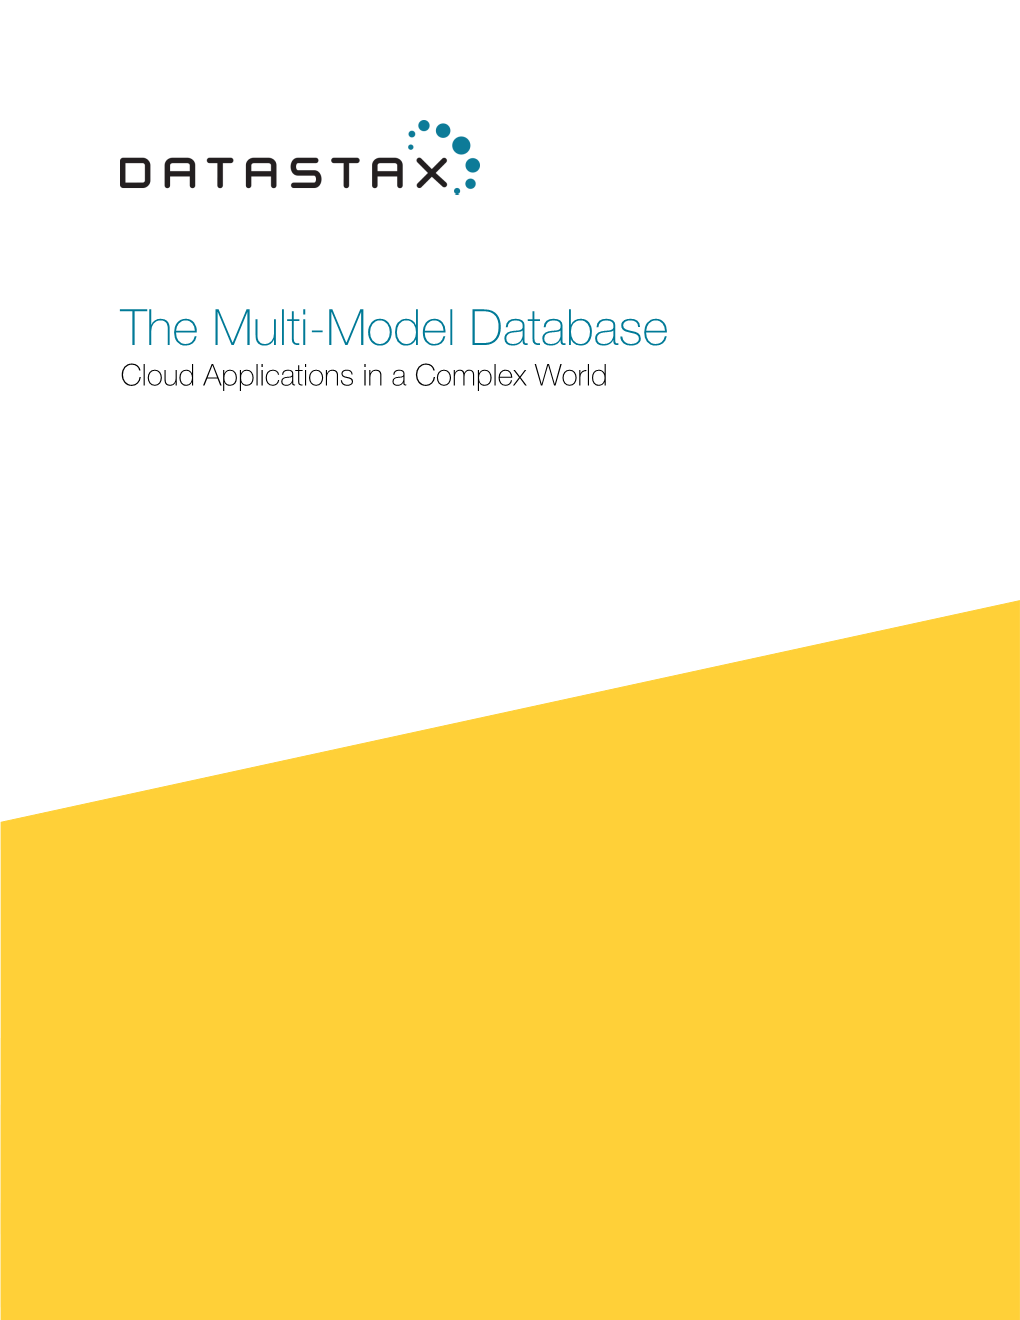 The Multi-Model Database Cloud Applications in a Complex World